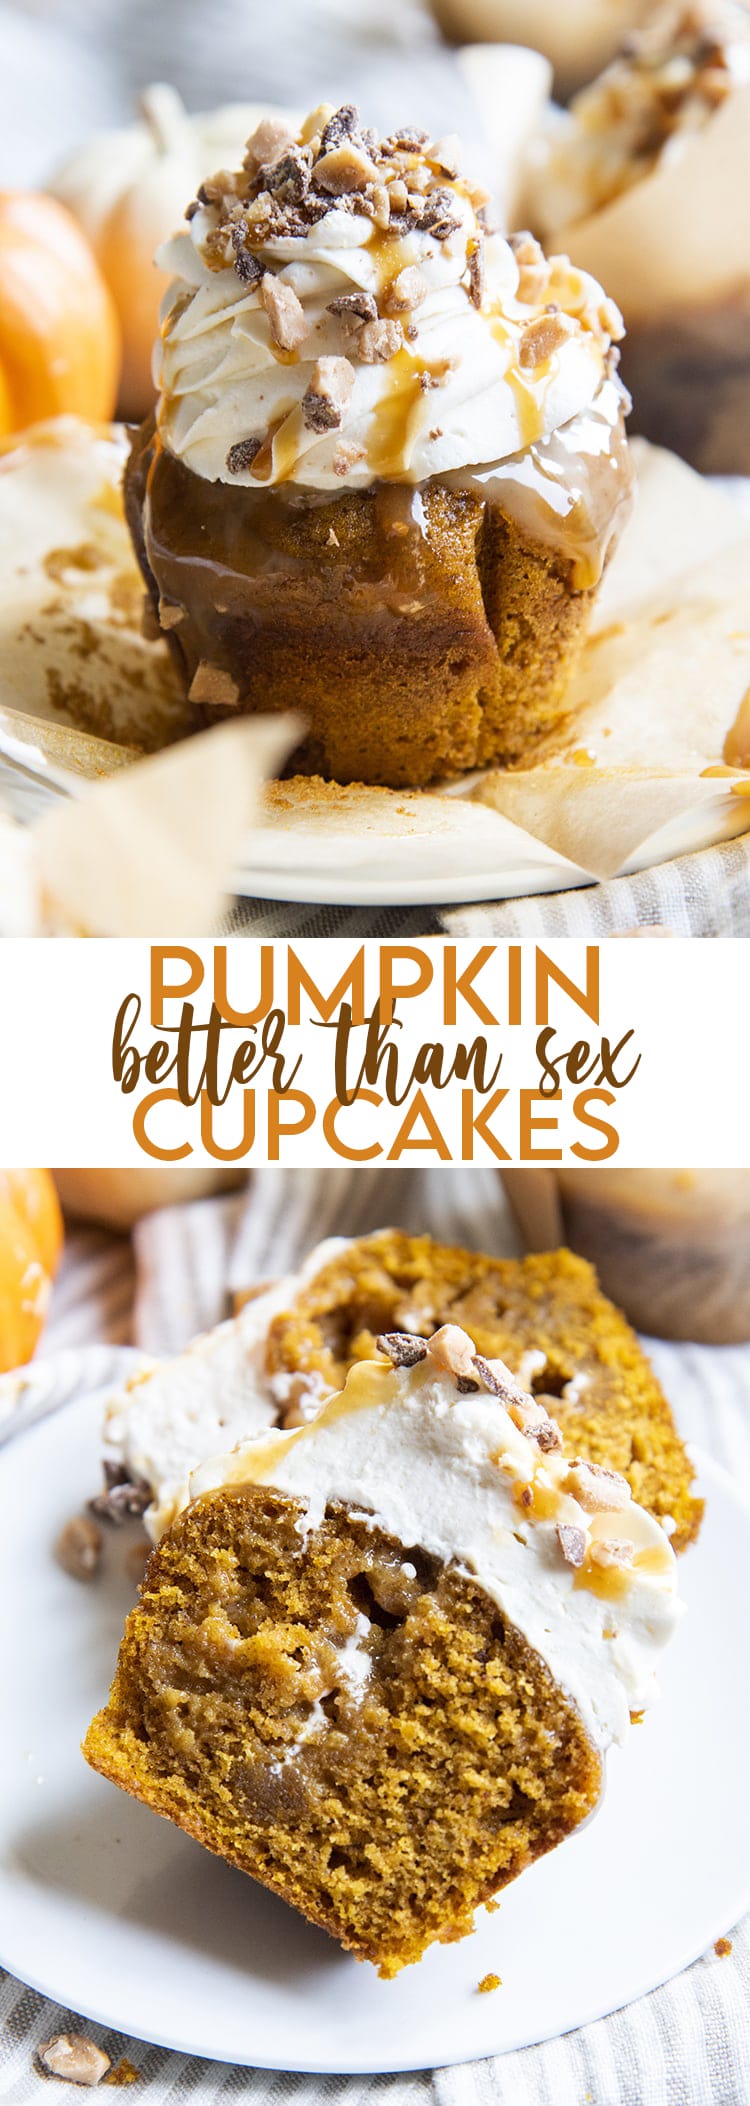 A collage of pumpkin better than sex cupcakes with text overlay with same description.